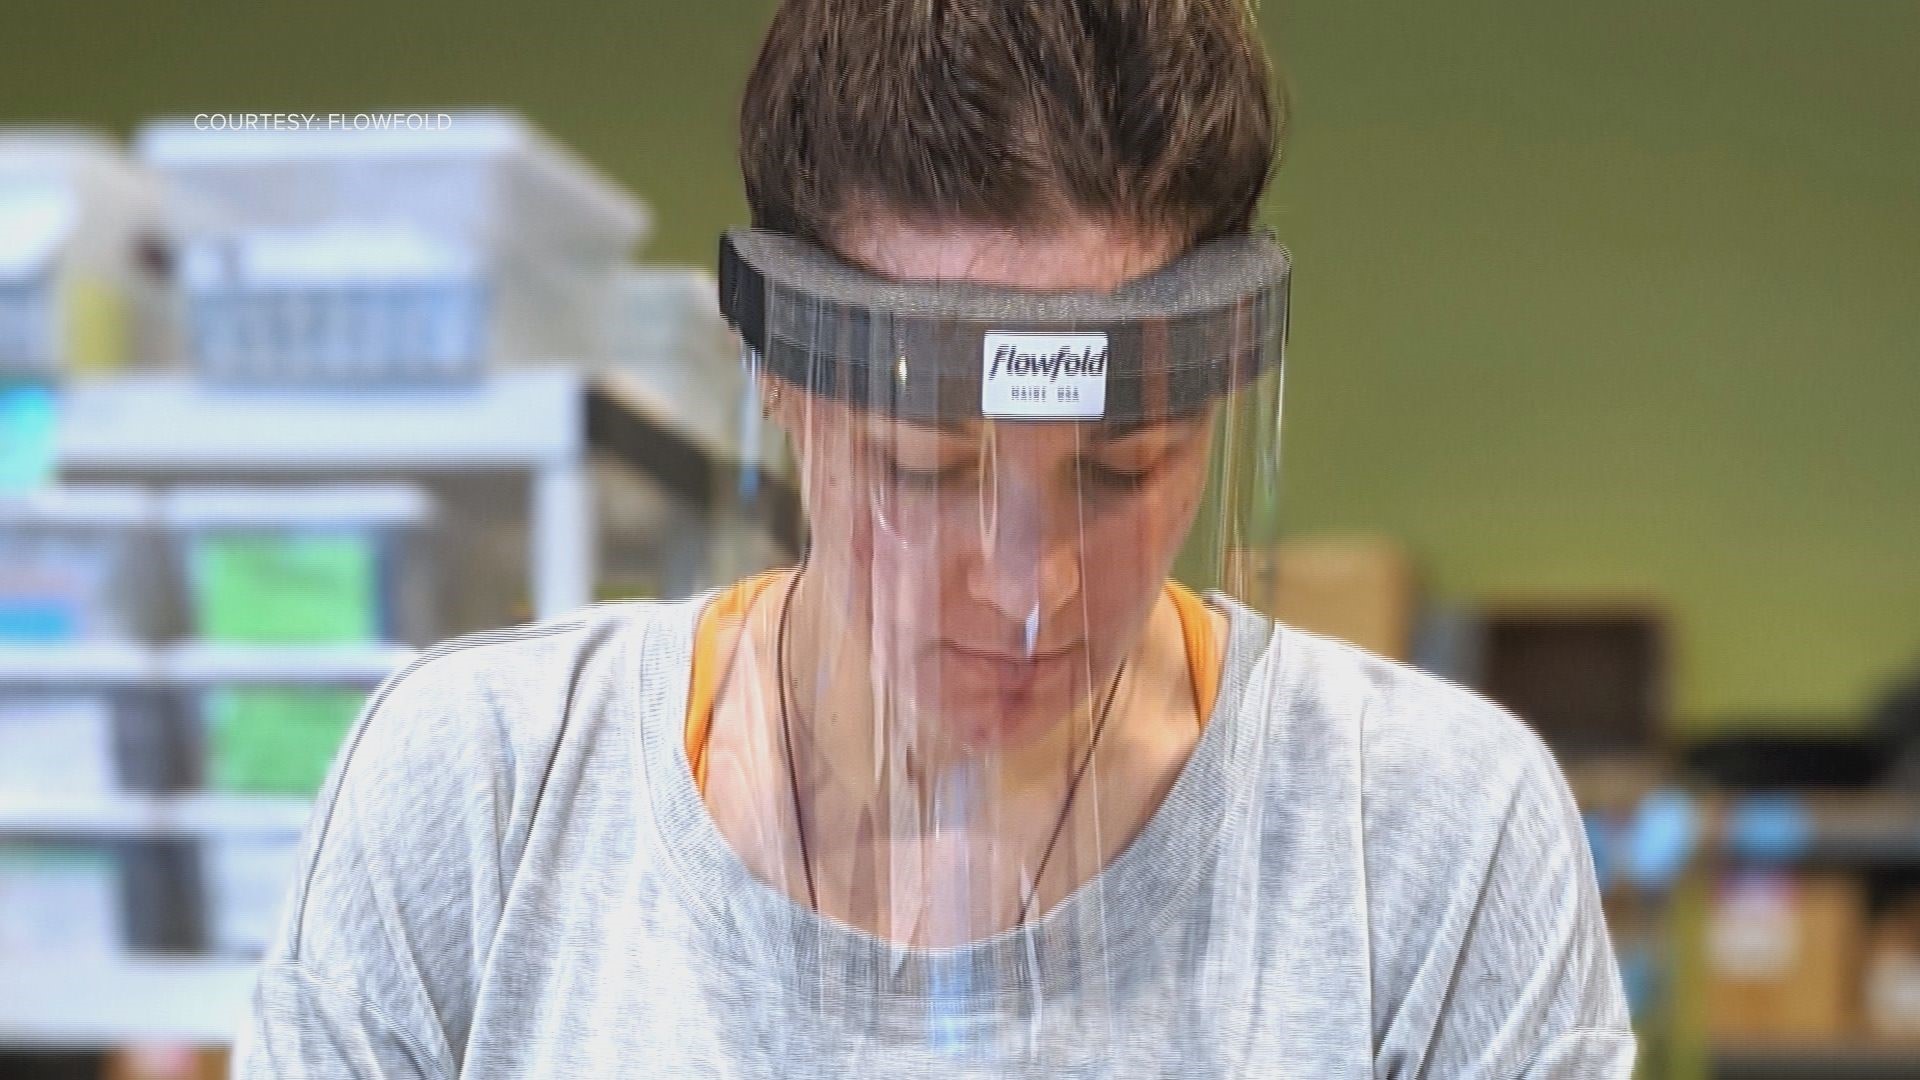 The Gorham-based company Flowfold designed and manufactured 1,000 plastic face shields for Maine Medical Center in just eight days.